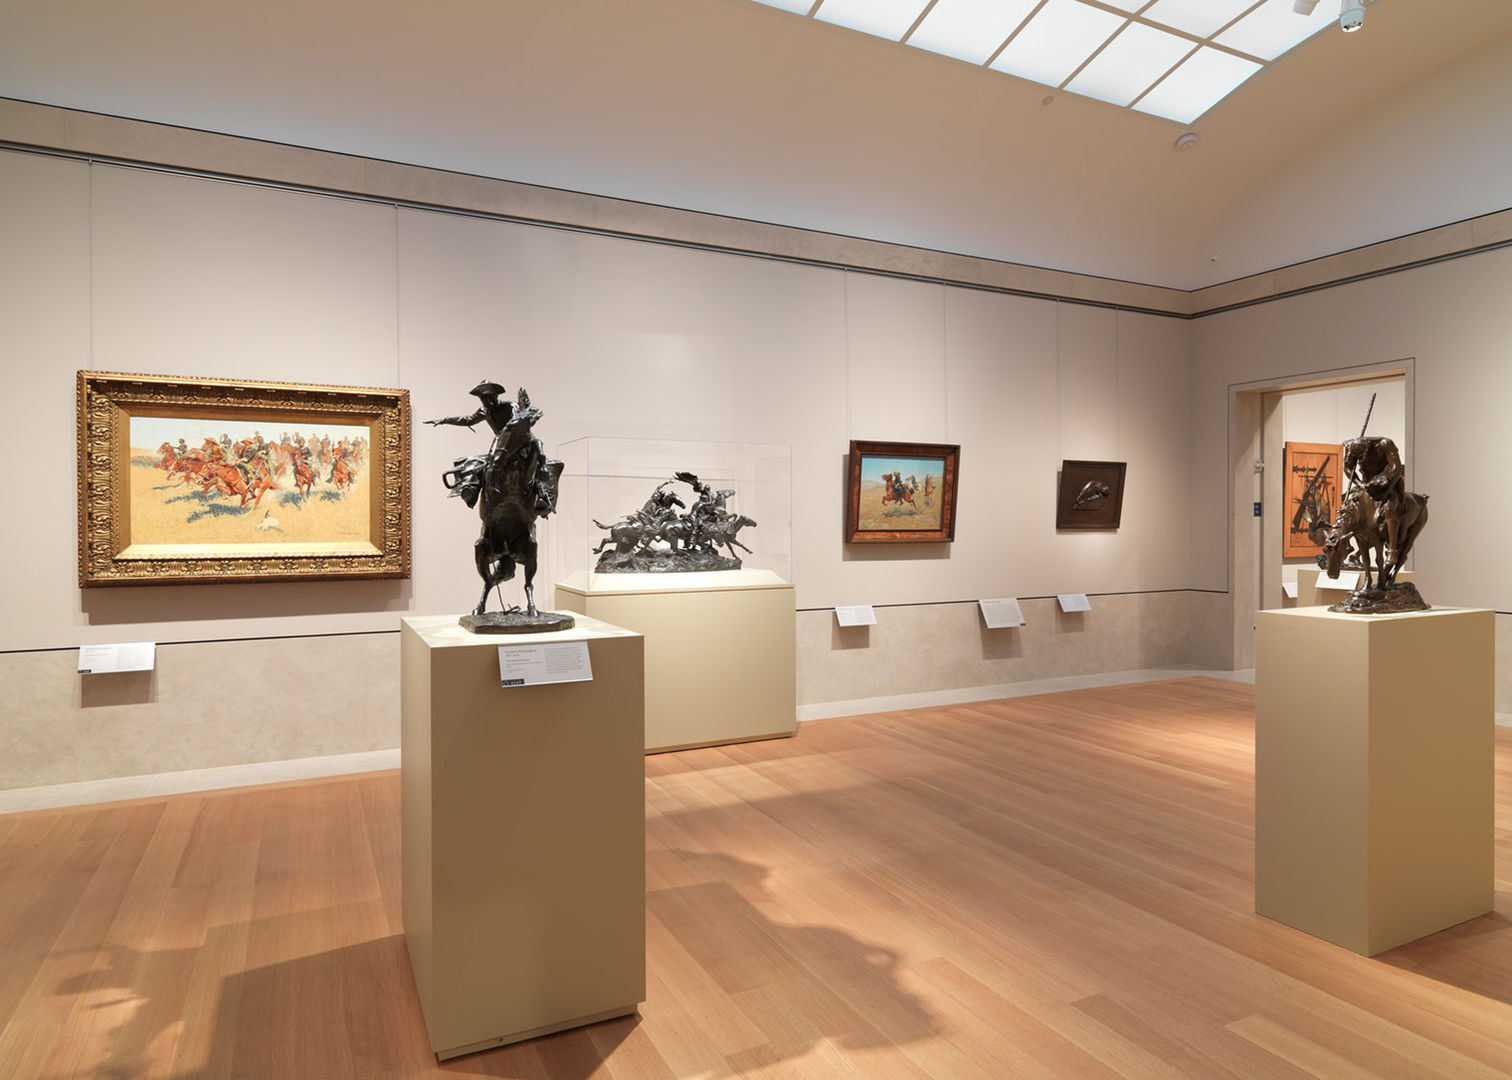 A gallery at The Met with sculptures and paintings depicting the American West